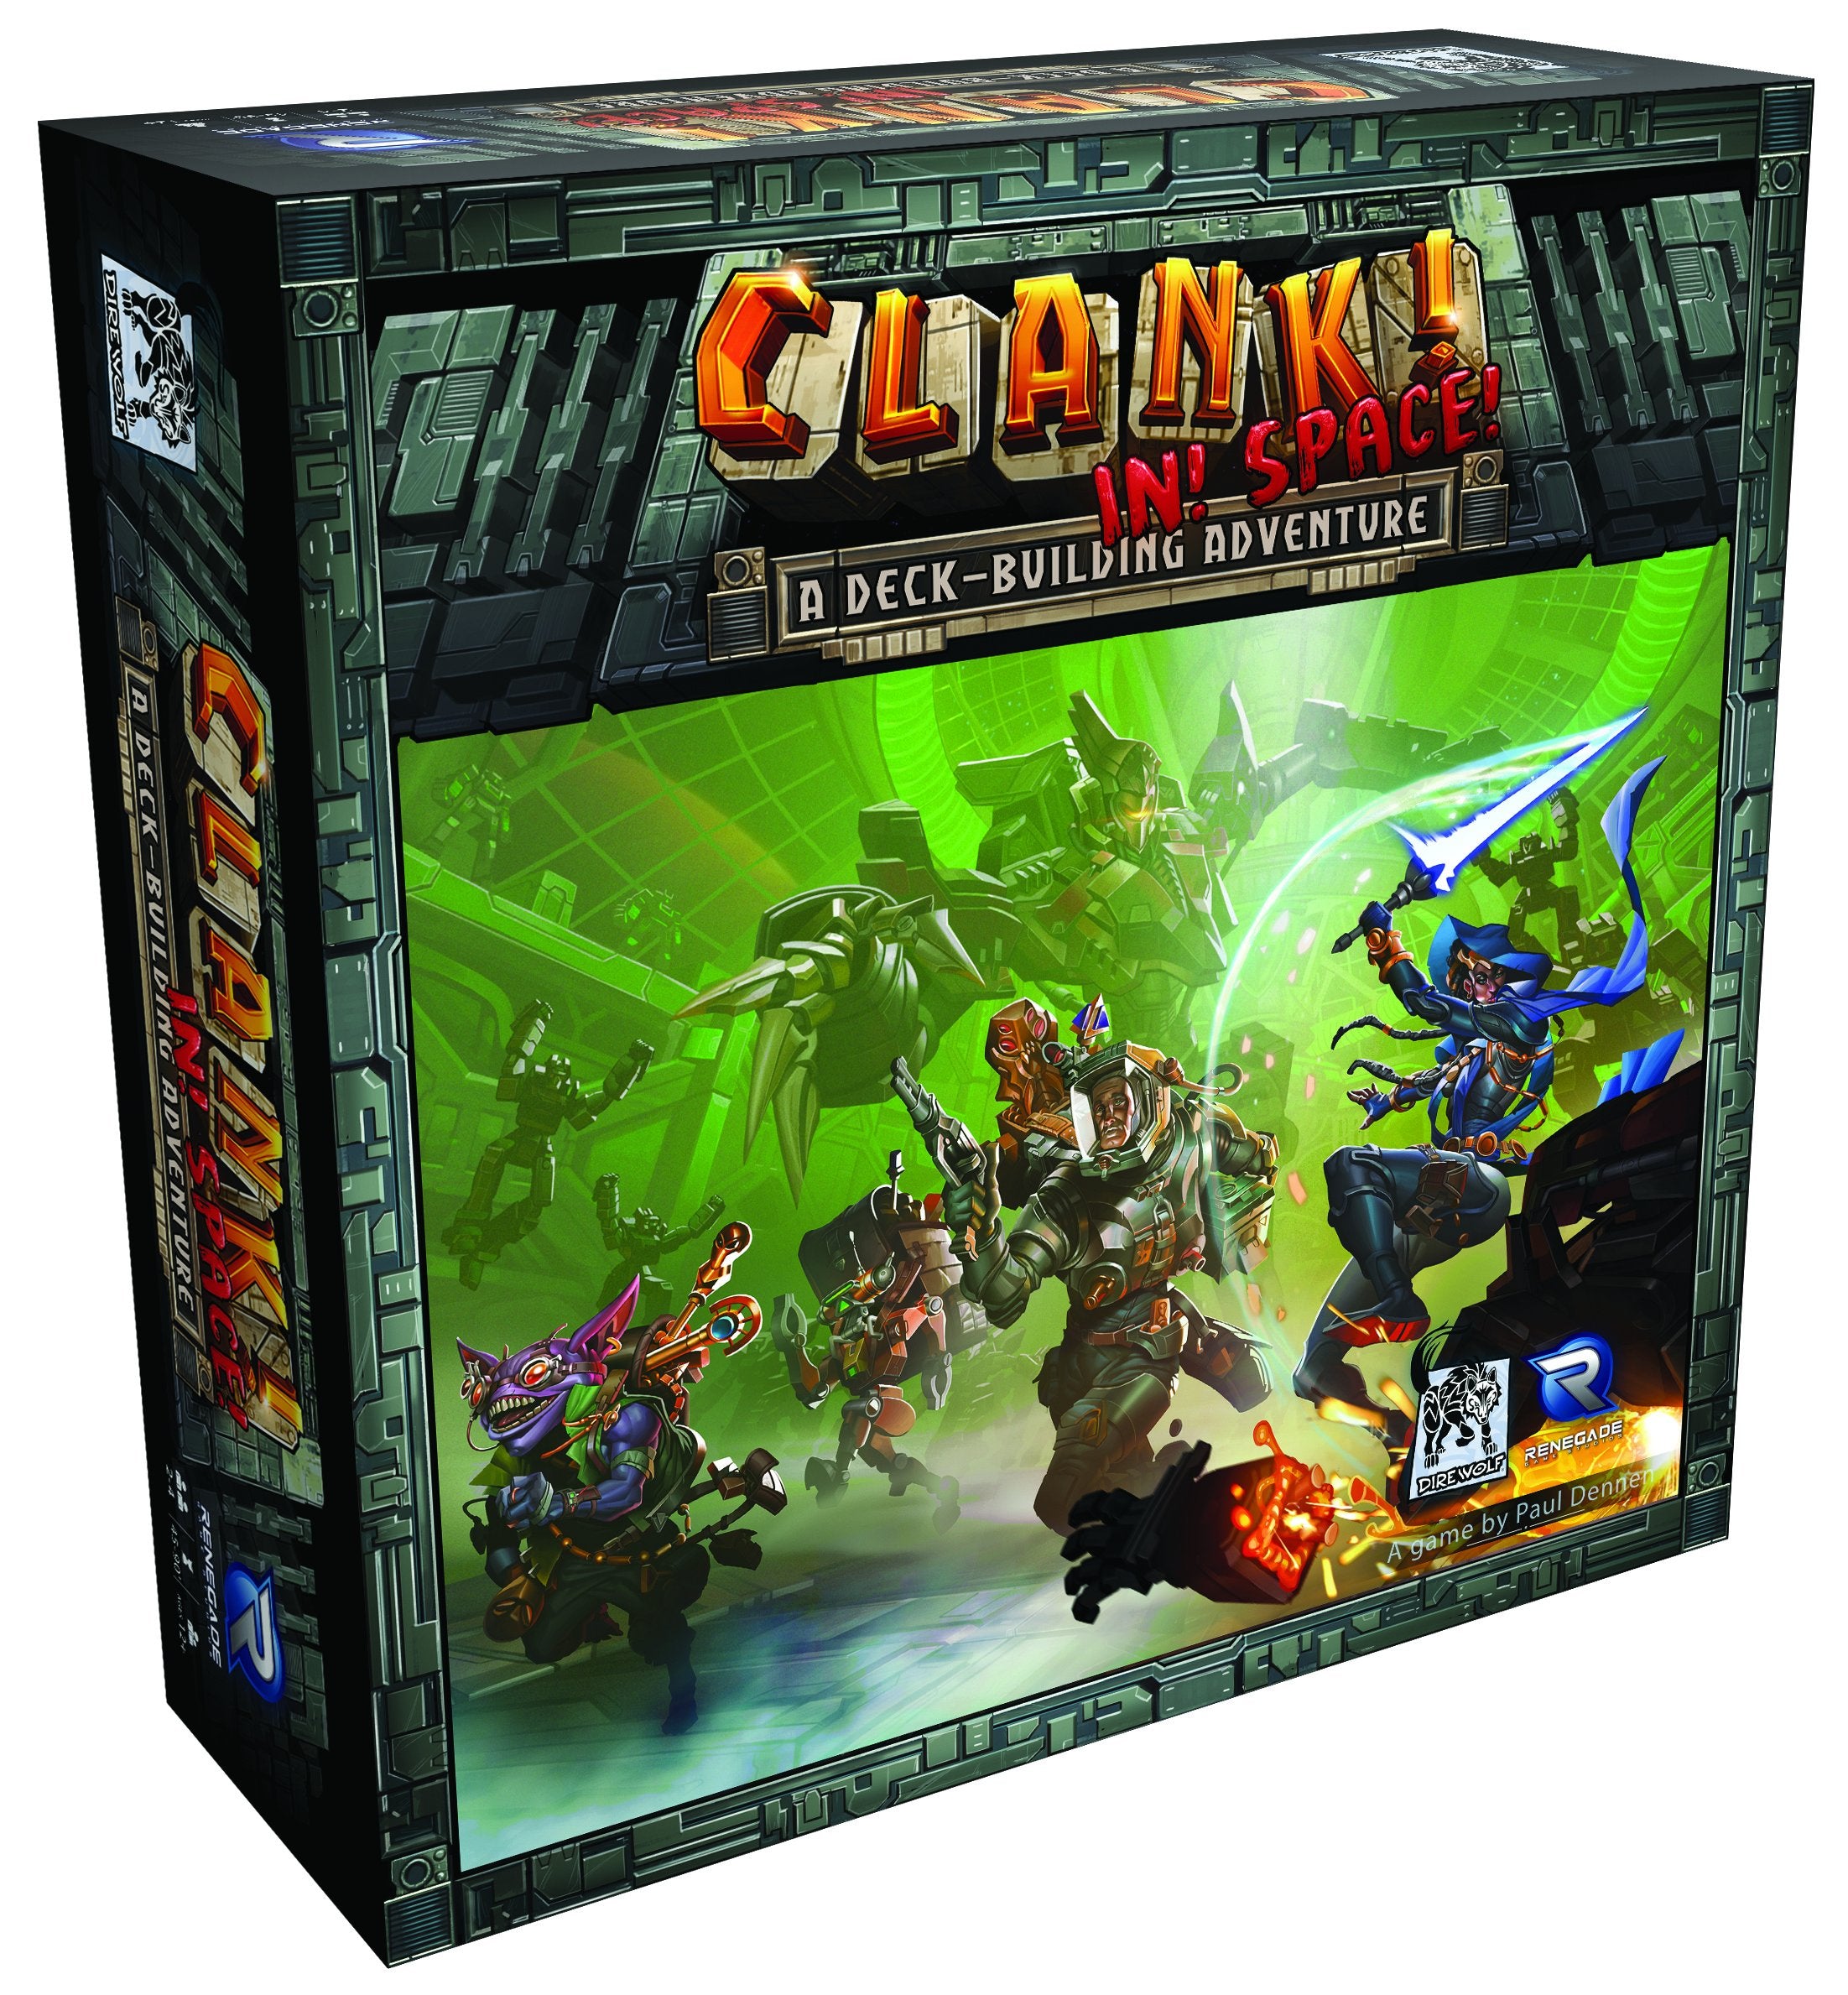 CLANK! In Space! box